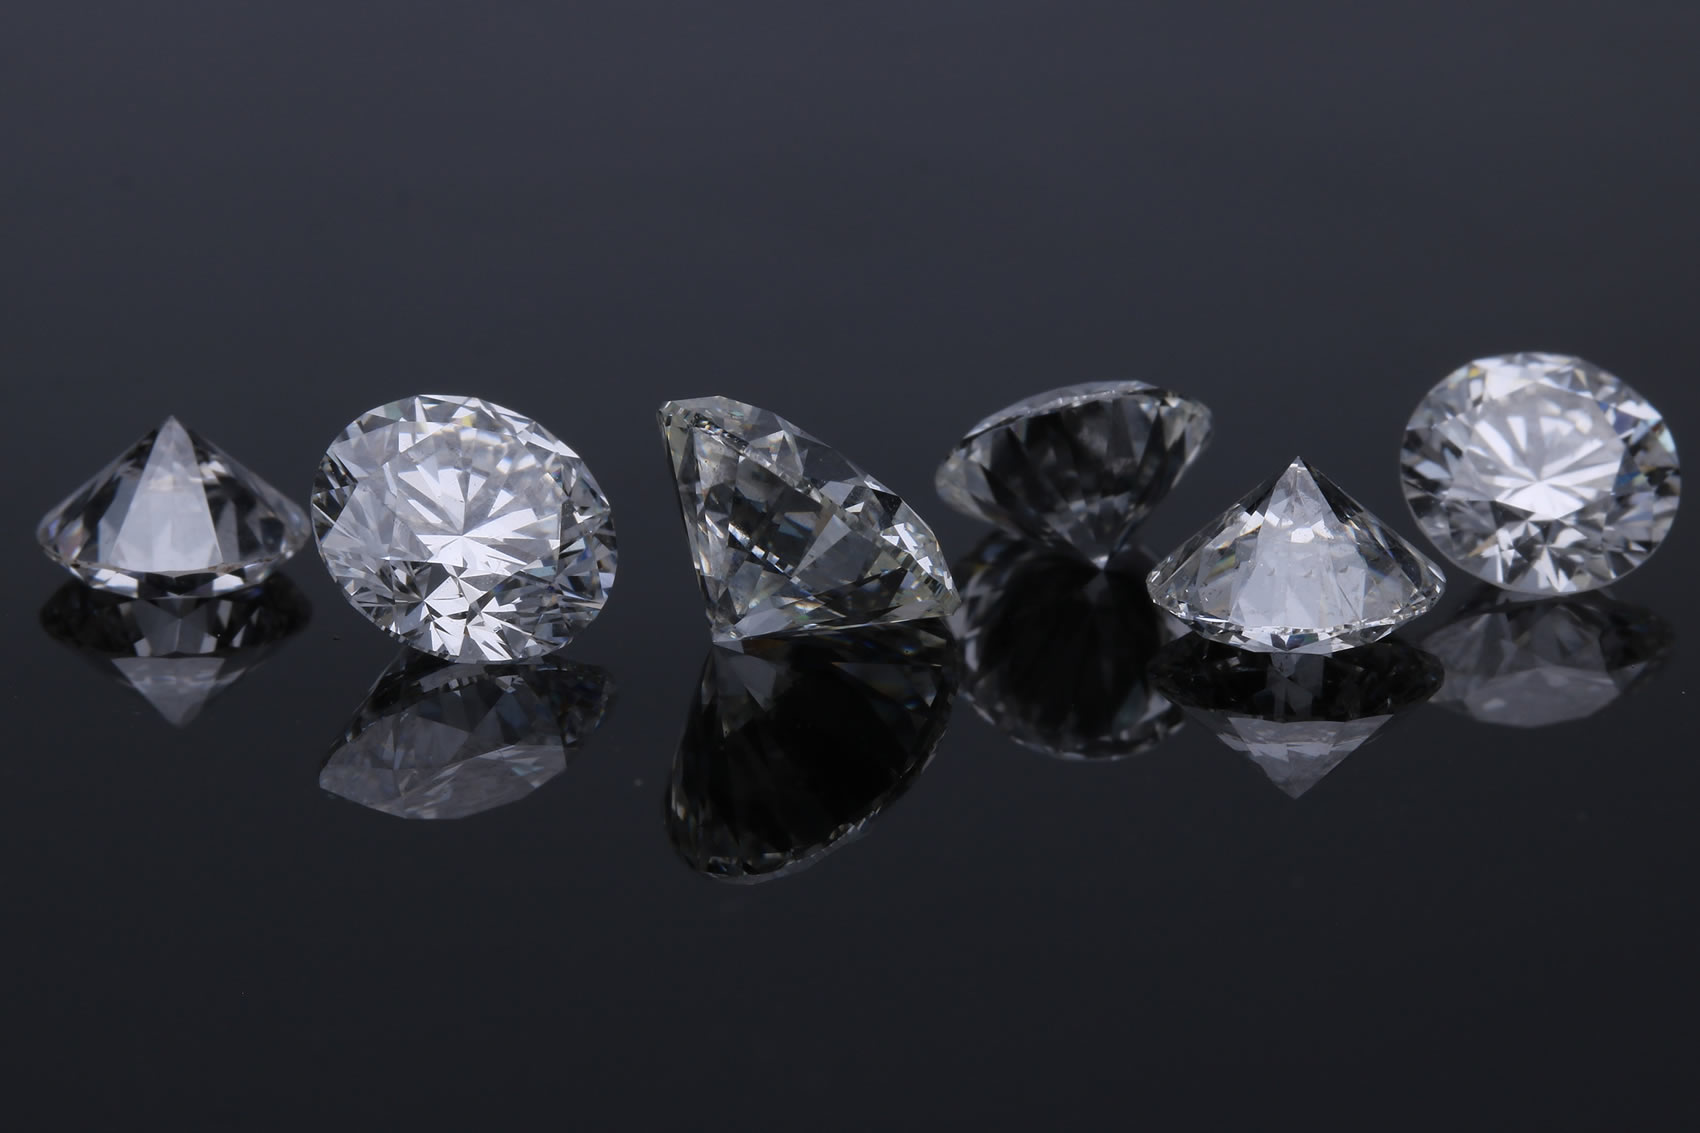 Making a case for natural diamonds